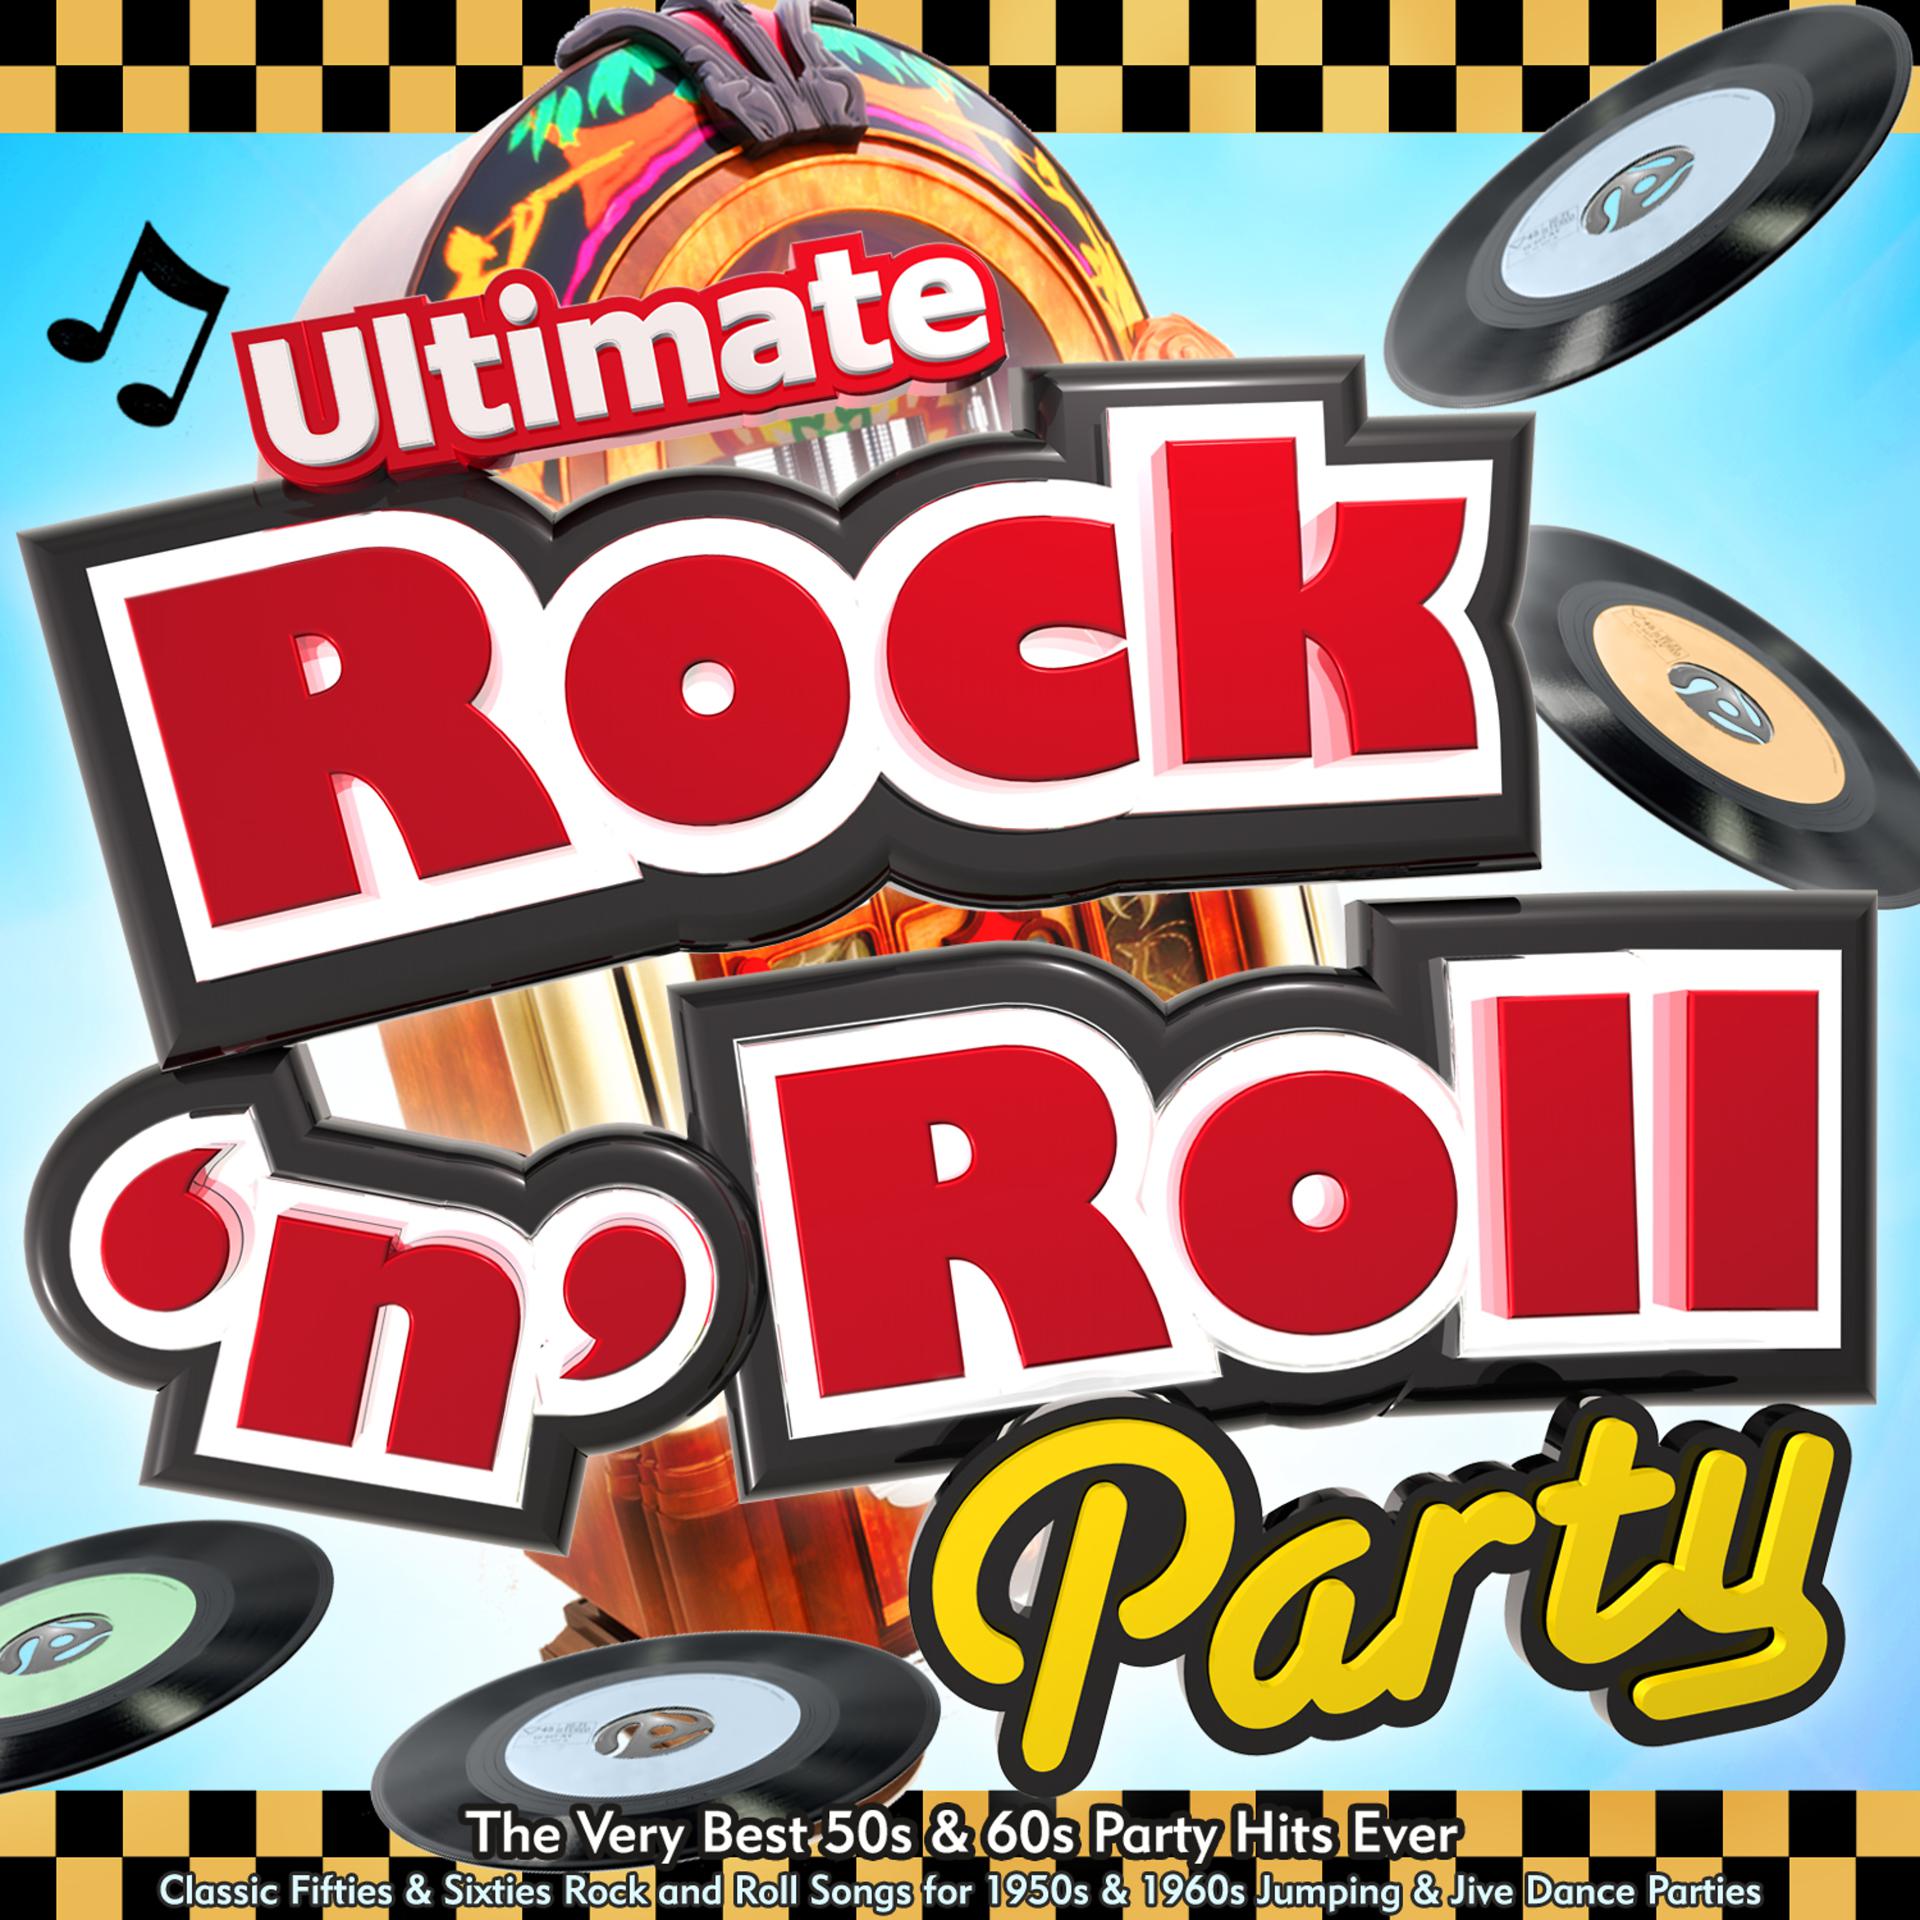 Постер альбома Ultimate Rock n Roll Party - The Very Best 50s & 60s Party Hits Ever - Classic Fifties & Sixties Rock and Roll Songs for 1950s & 1960s Jumping & Jive Dance Parties (Jukebox Mix Edition)